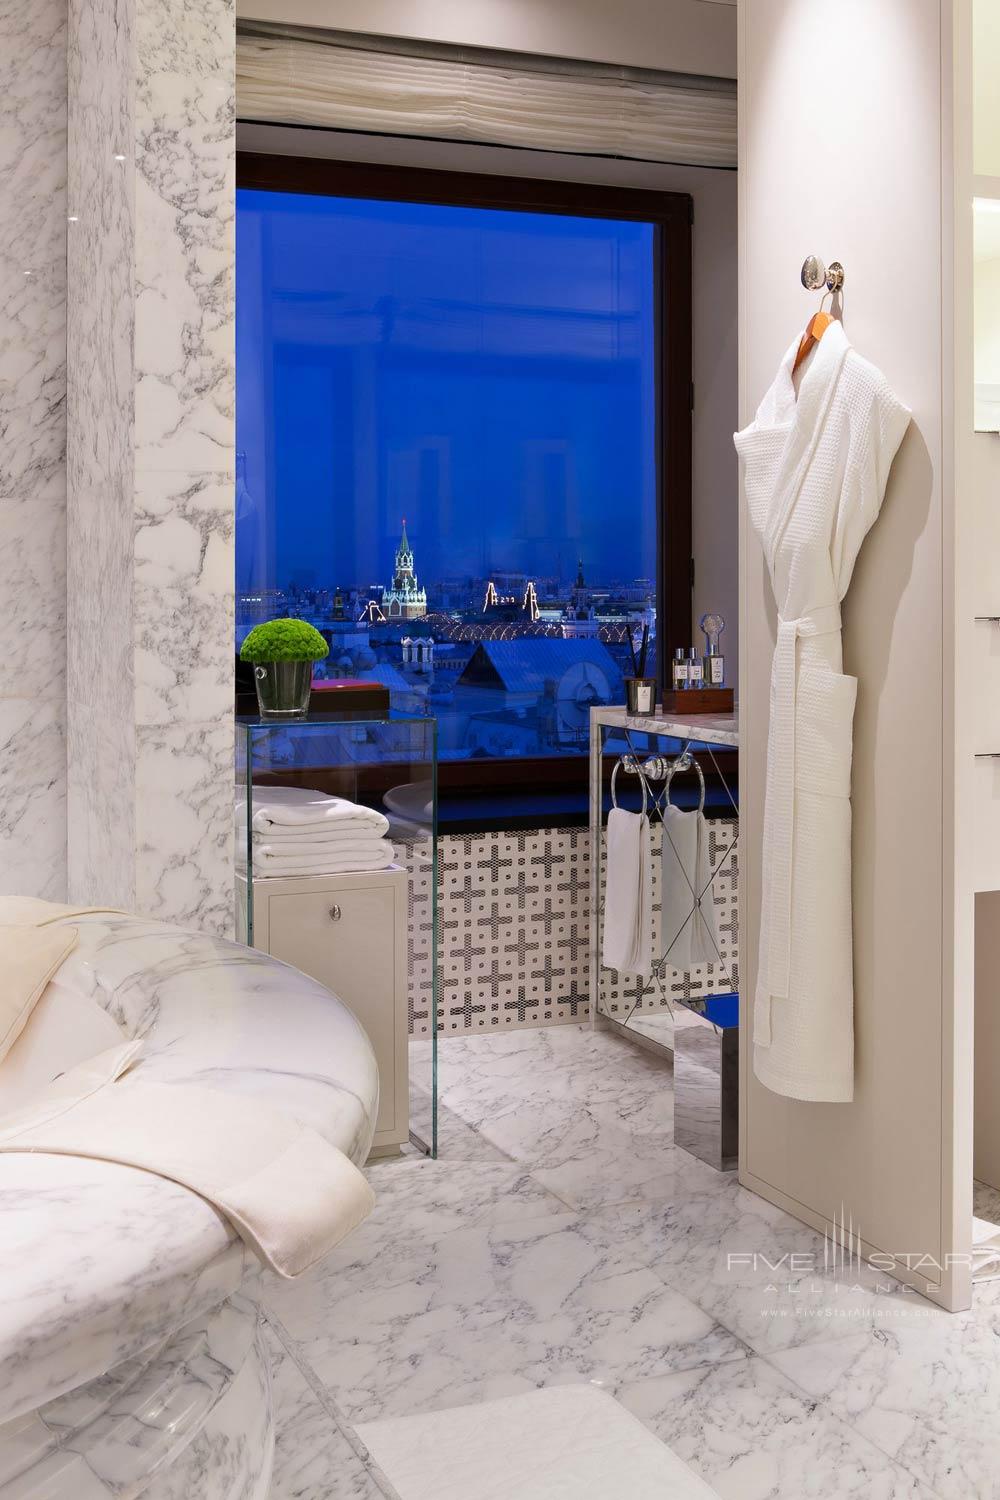 Penthouse Suite Bath at Ararat Park Hyatt Moscow, Moscow, Russia